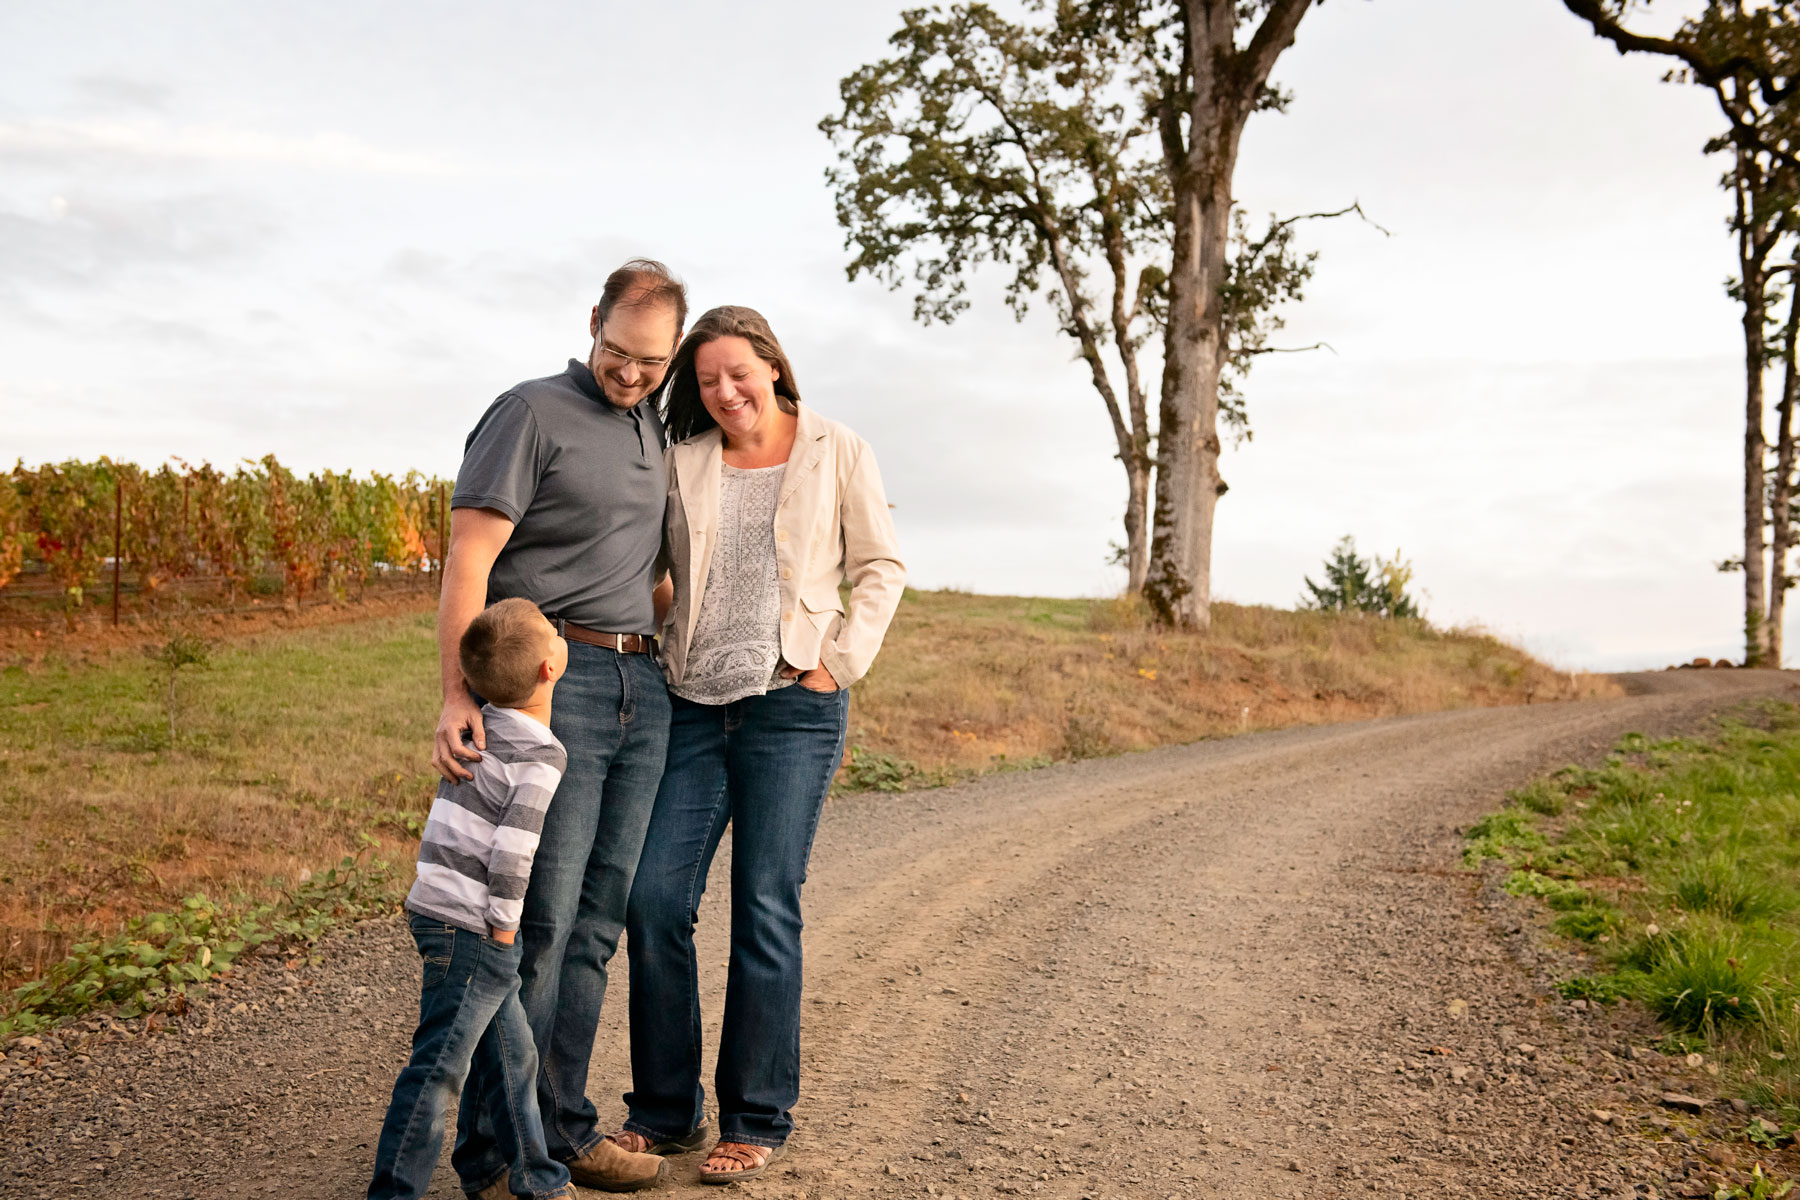 Family owned and operated Chris James vineyards